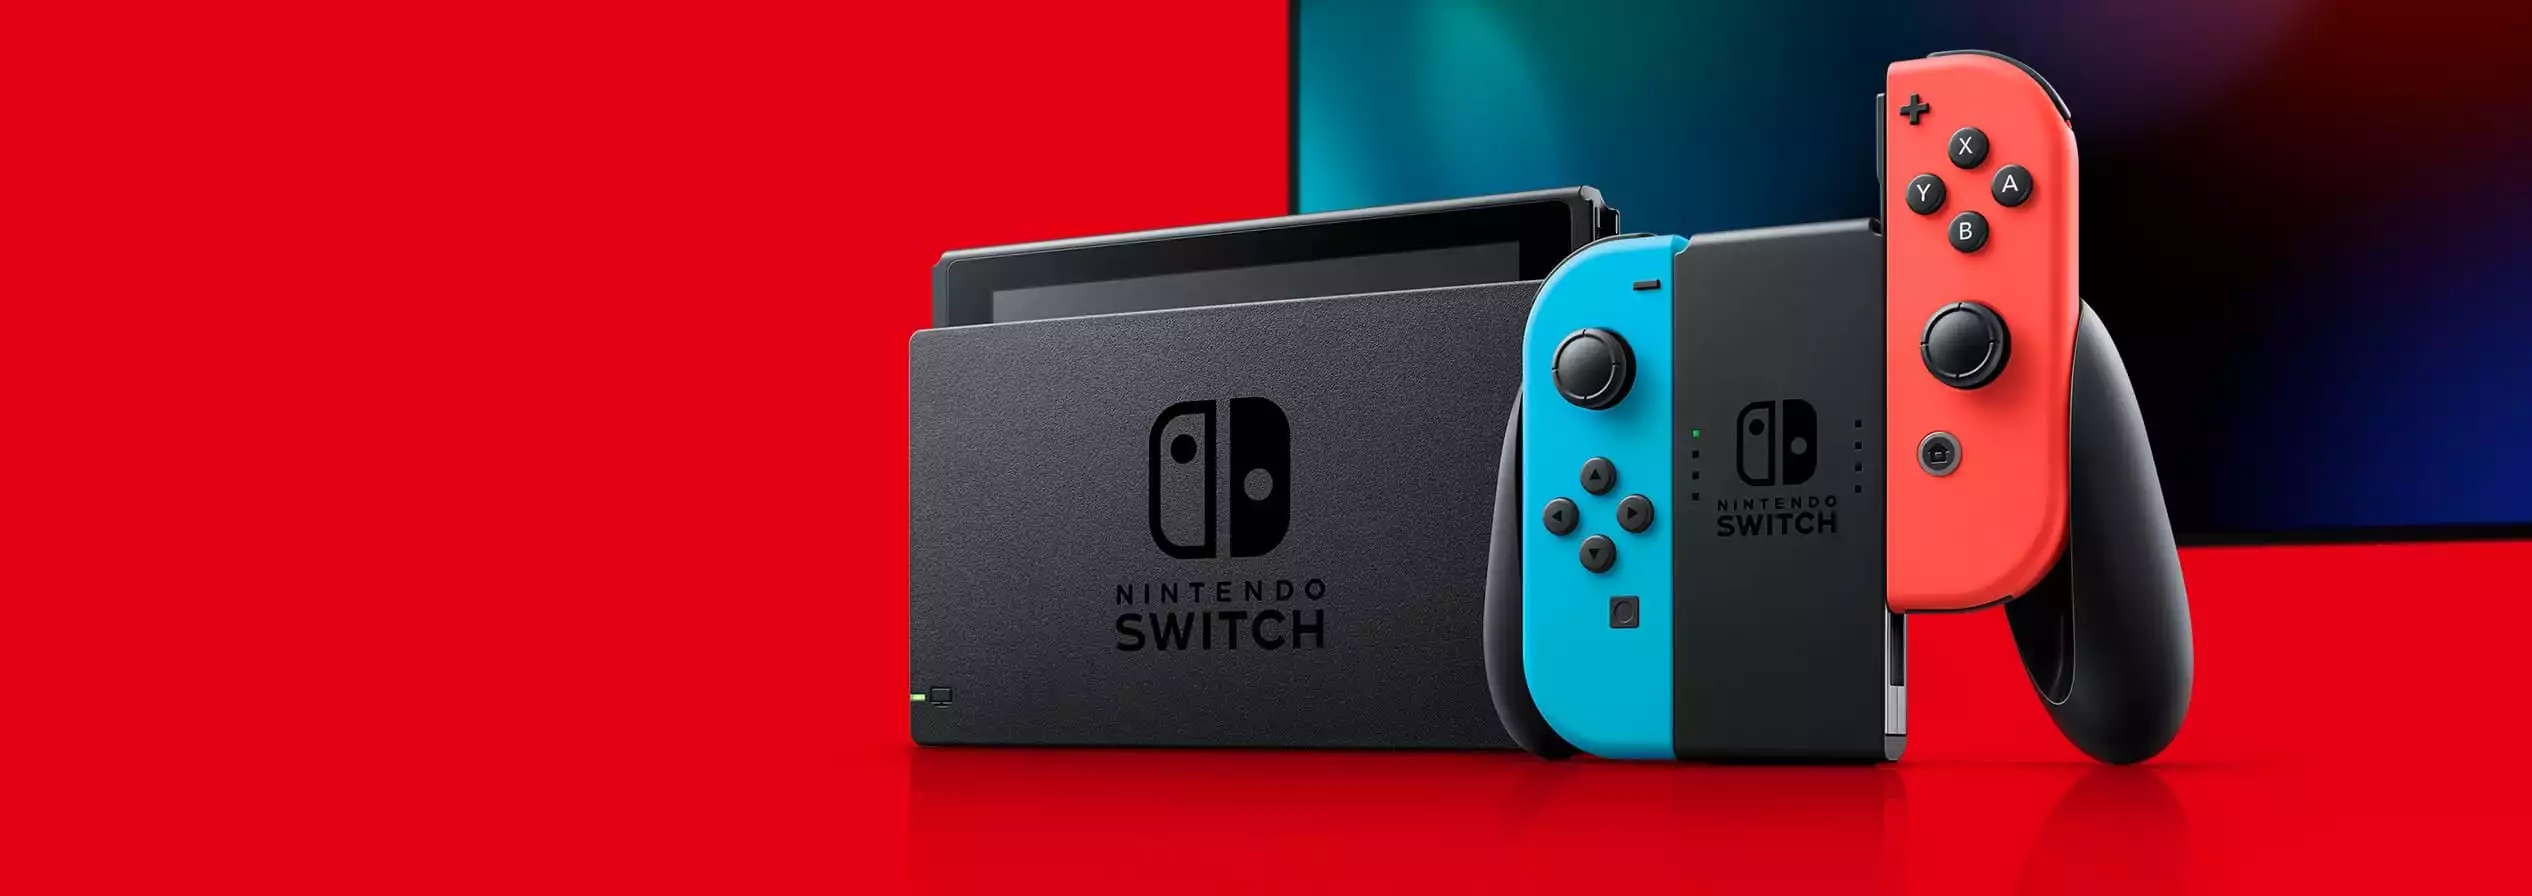 Best Switch Games: Top 10 Games On Nintendo Switch In 2022